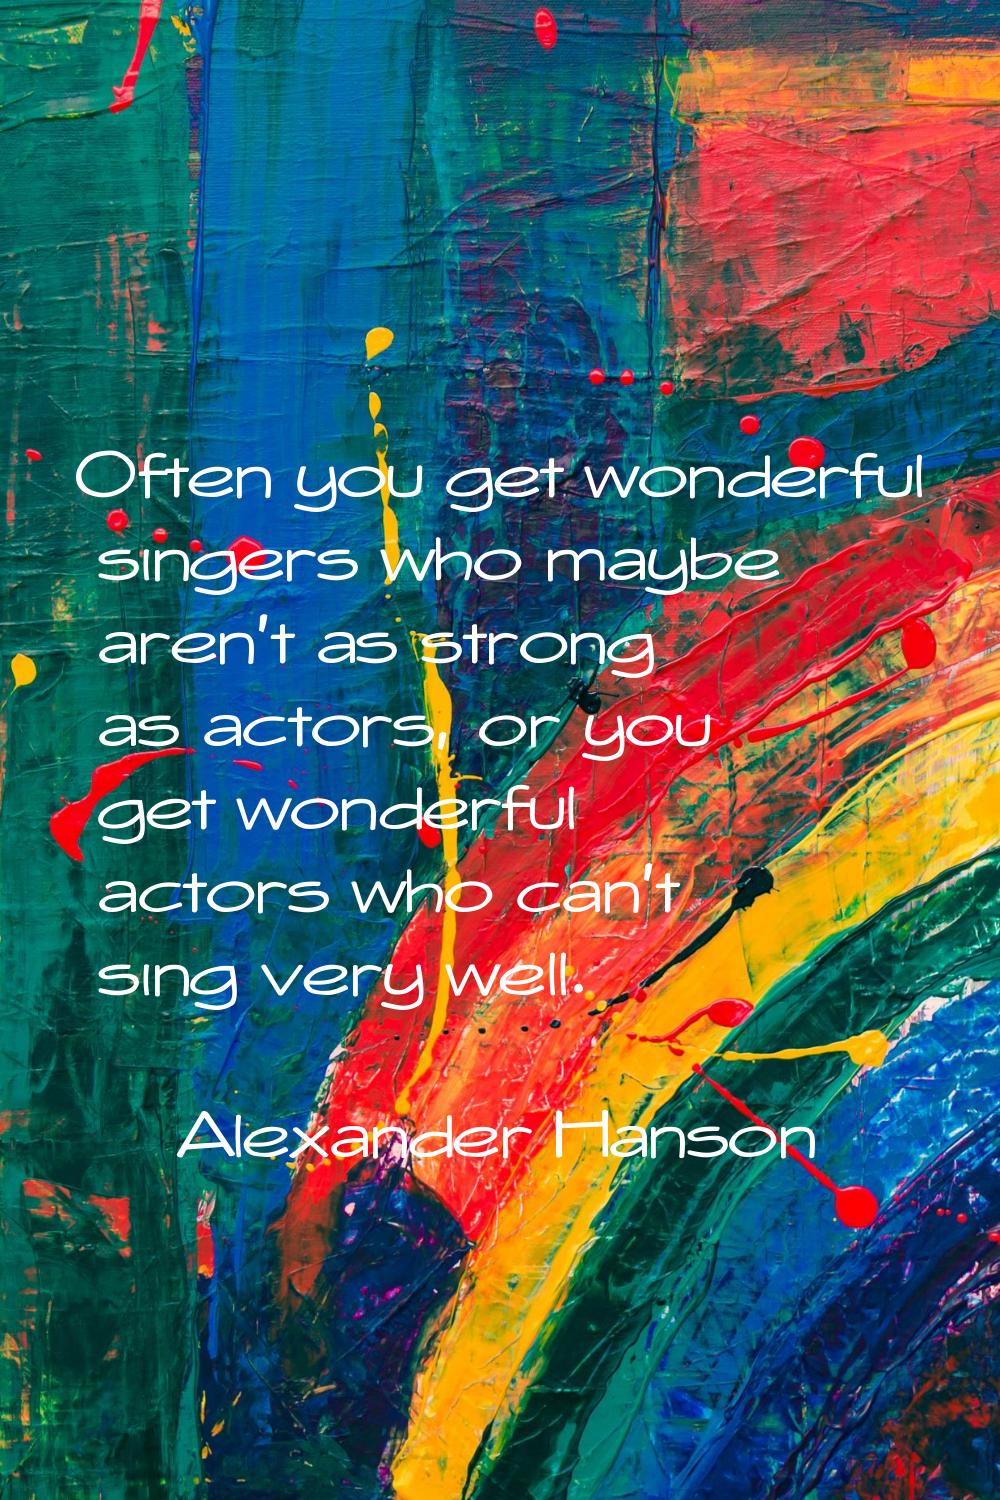 Often you get wonderful singers who maybe aren't as strong as actors, or you get wonderful actors w